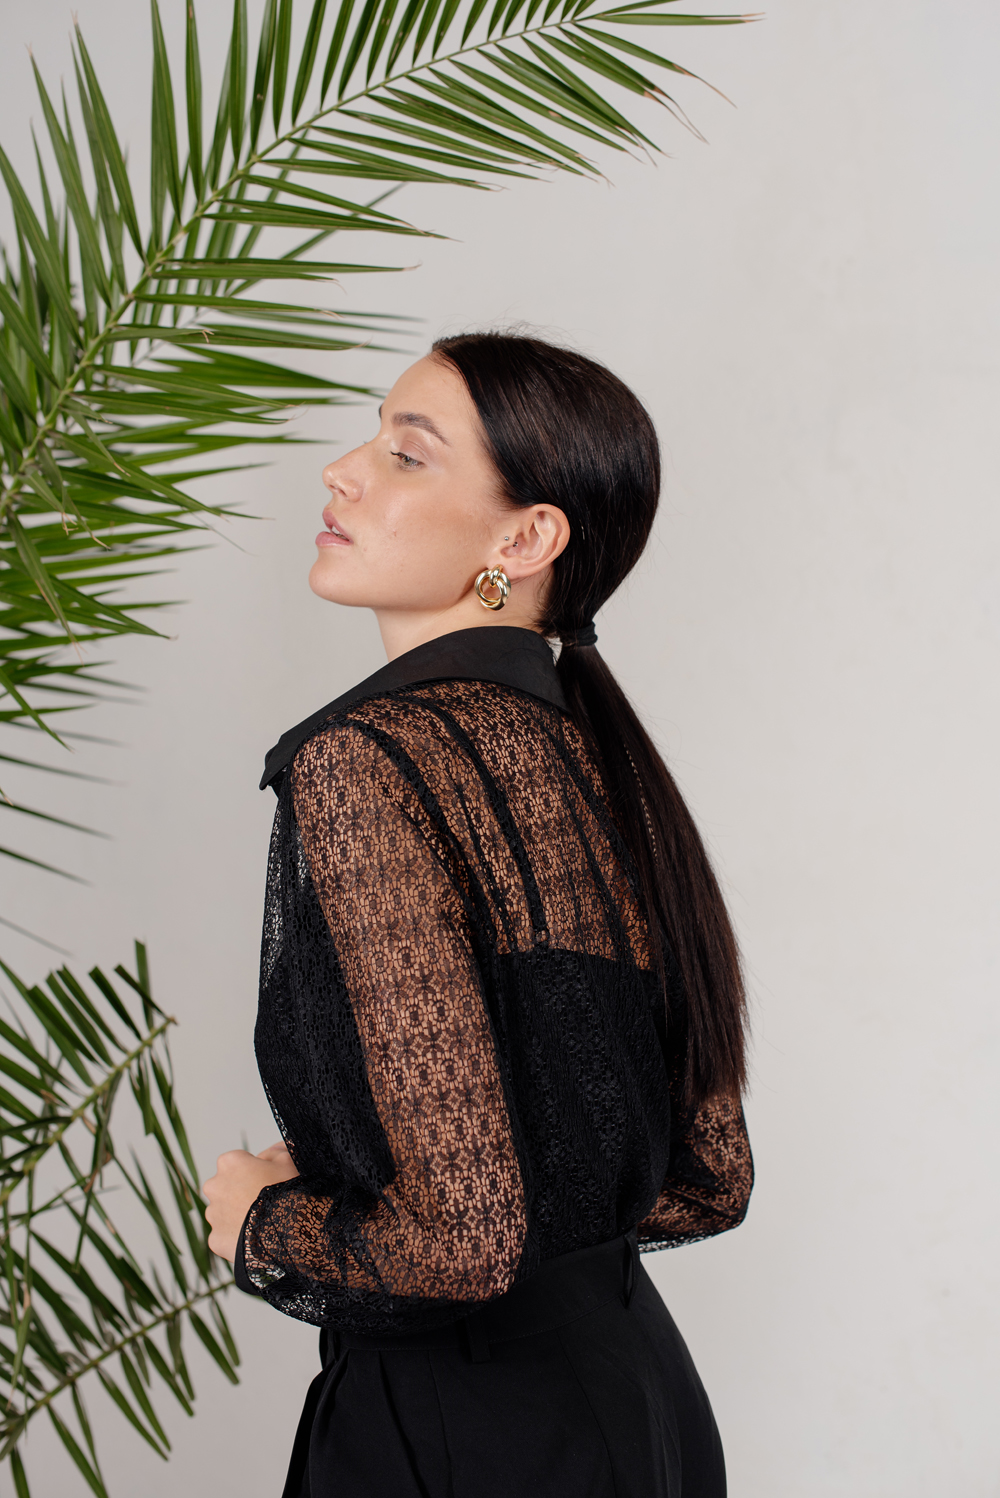 Black lace blouse with top